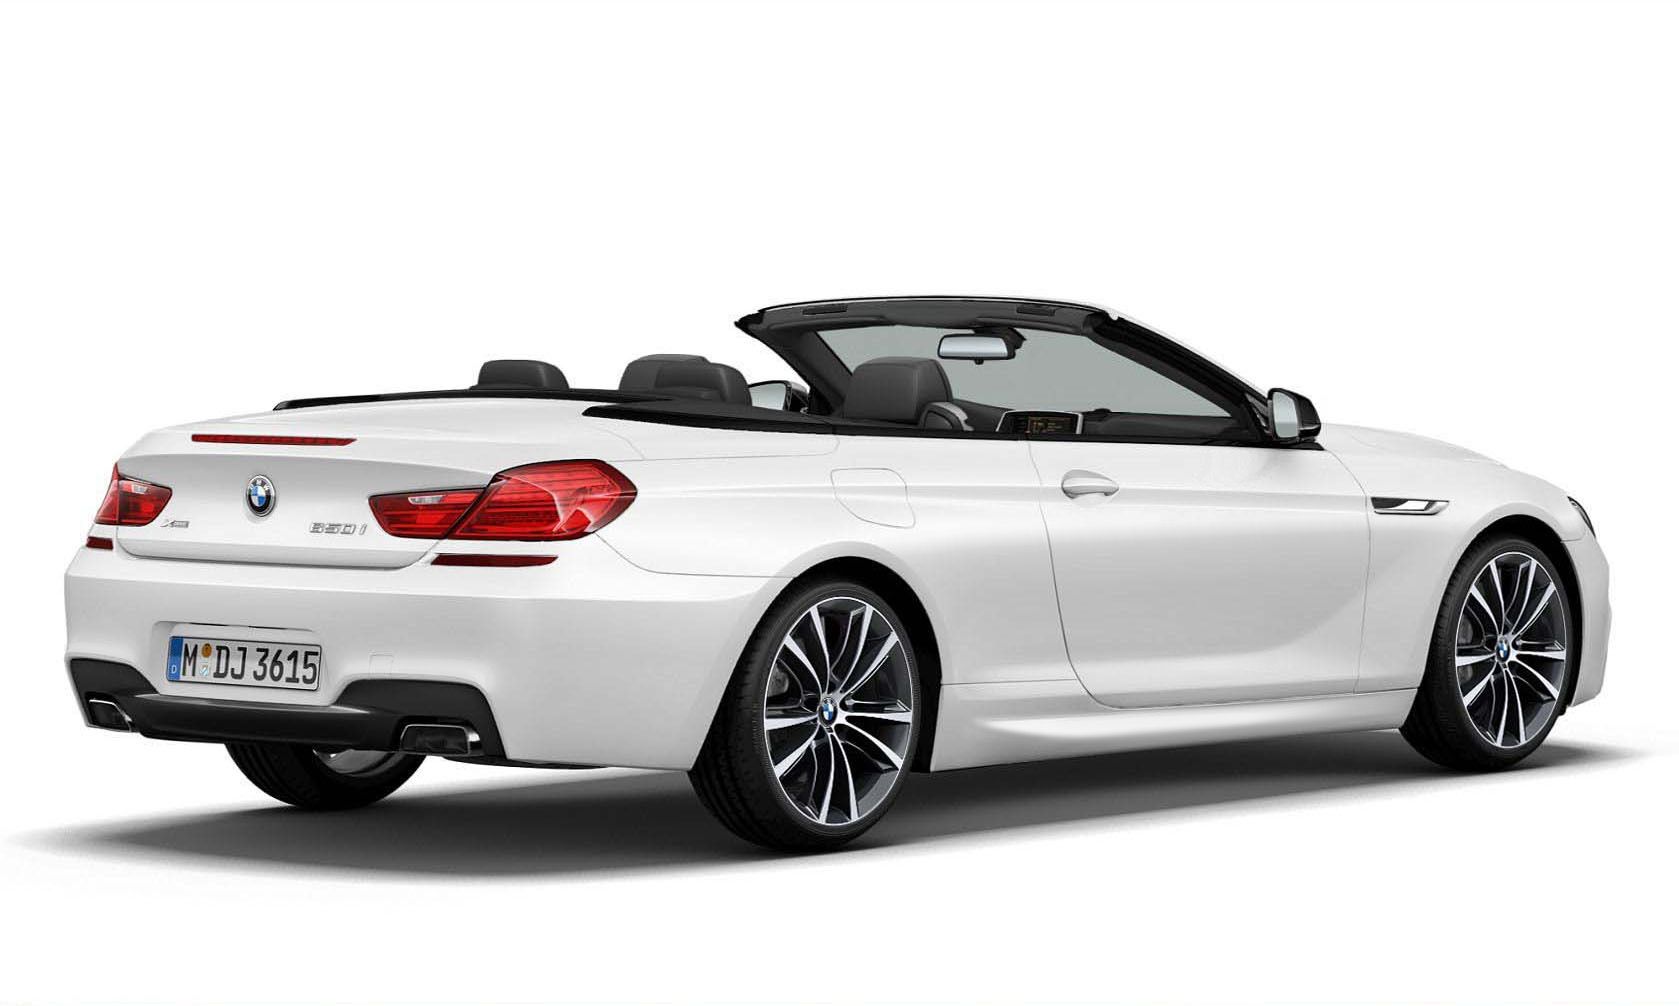 BMW 6 Series for Model Year 2014